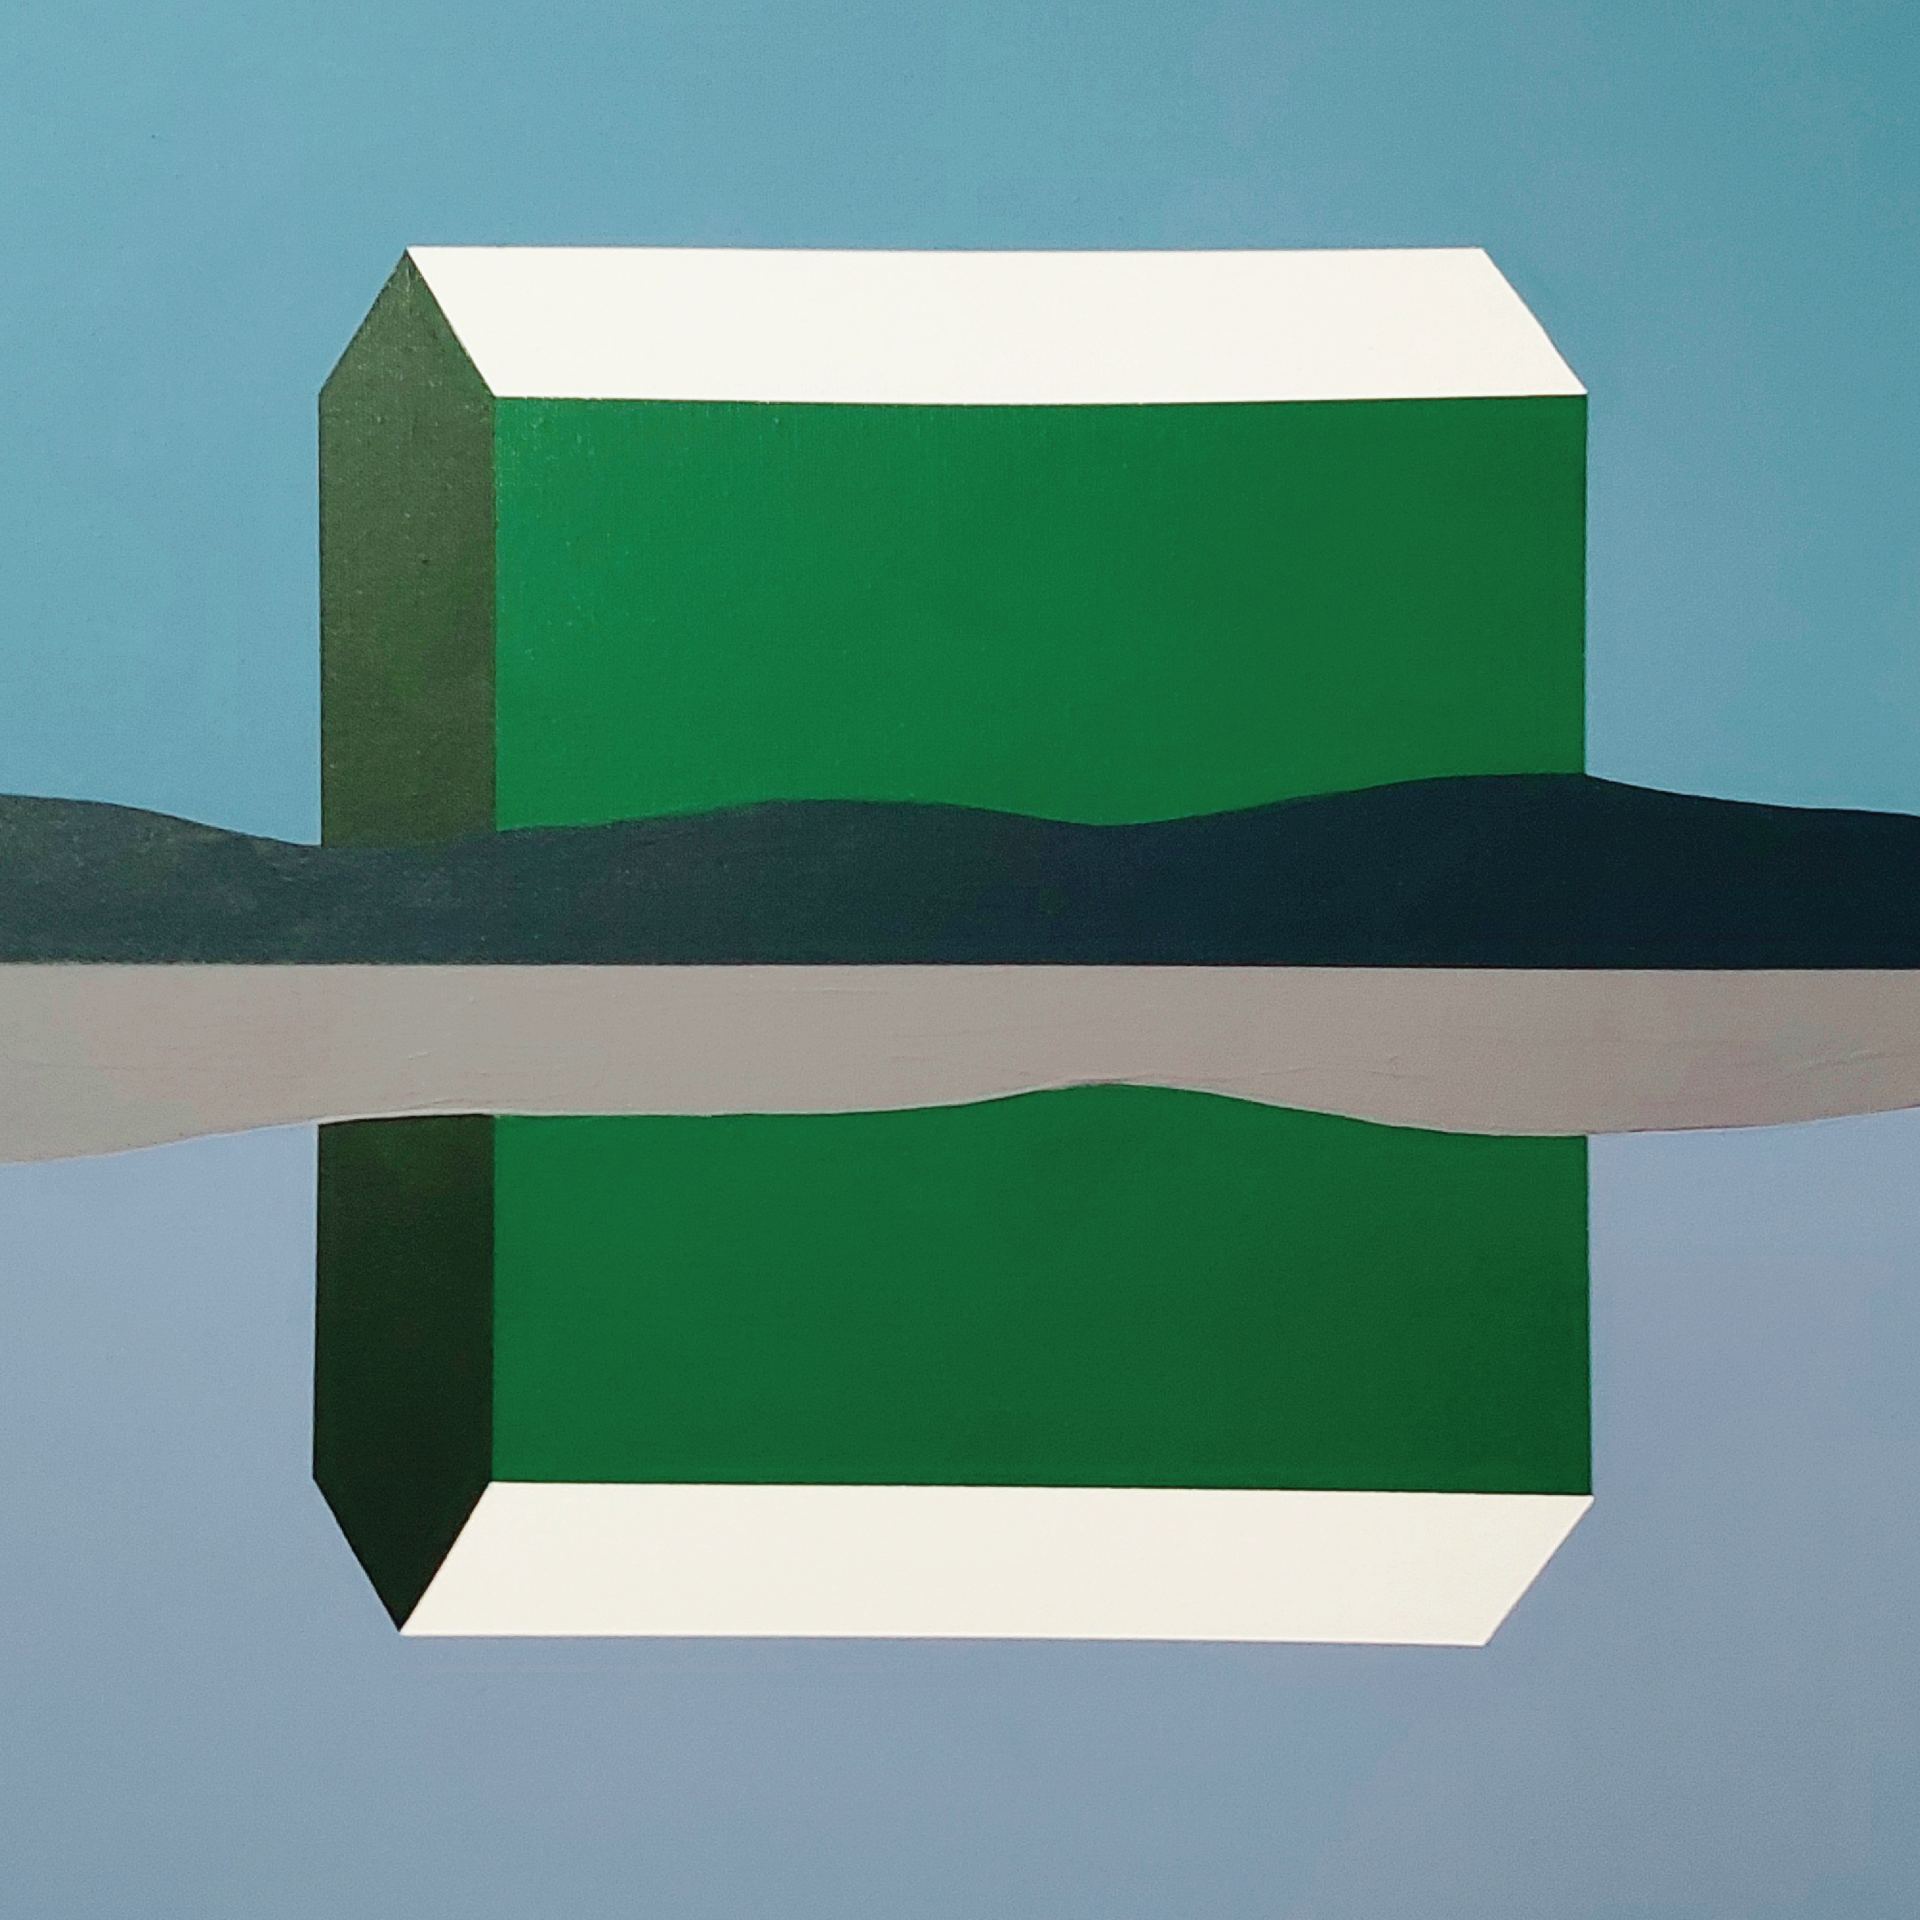 Green Barn Reflected Charles Pachter